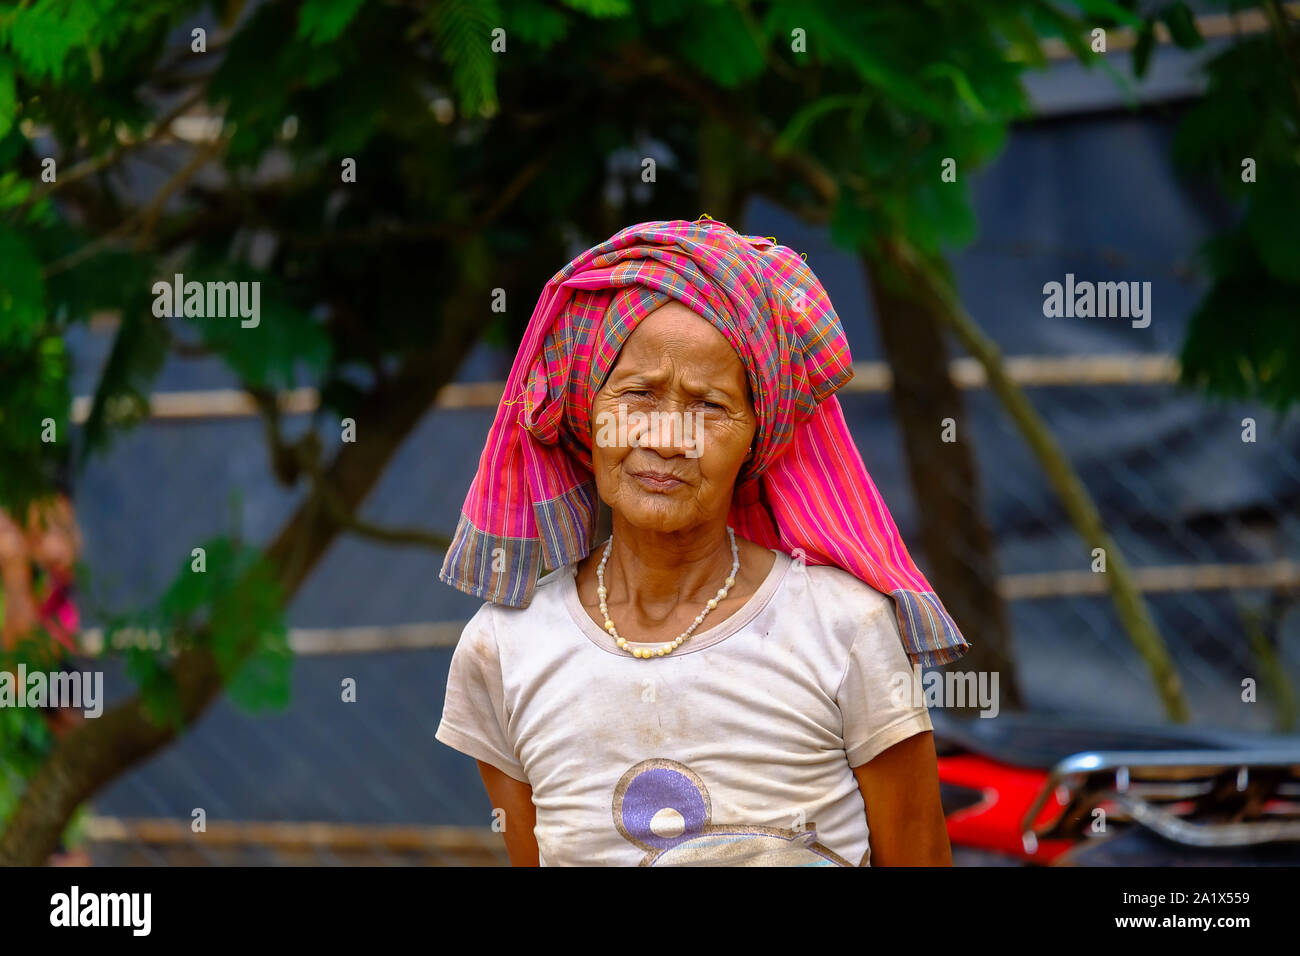 Portrait of a old woman at a poverty village in countryside of Vietnam.  Royalty high quality free stock image of portrait. Stock Photo